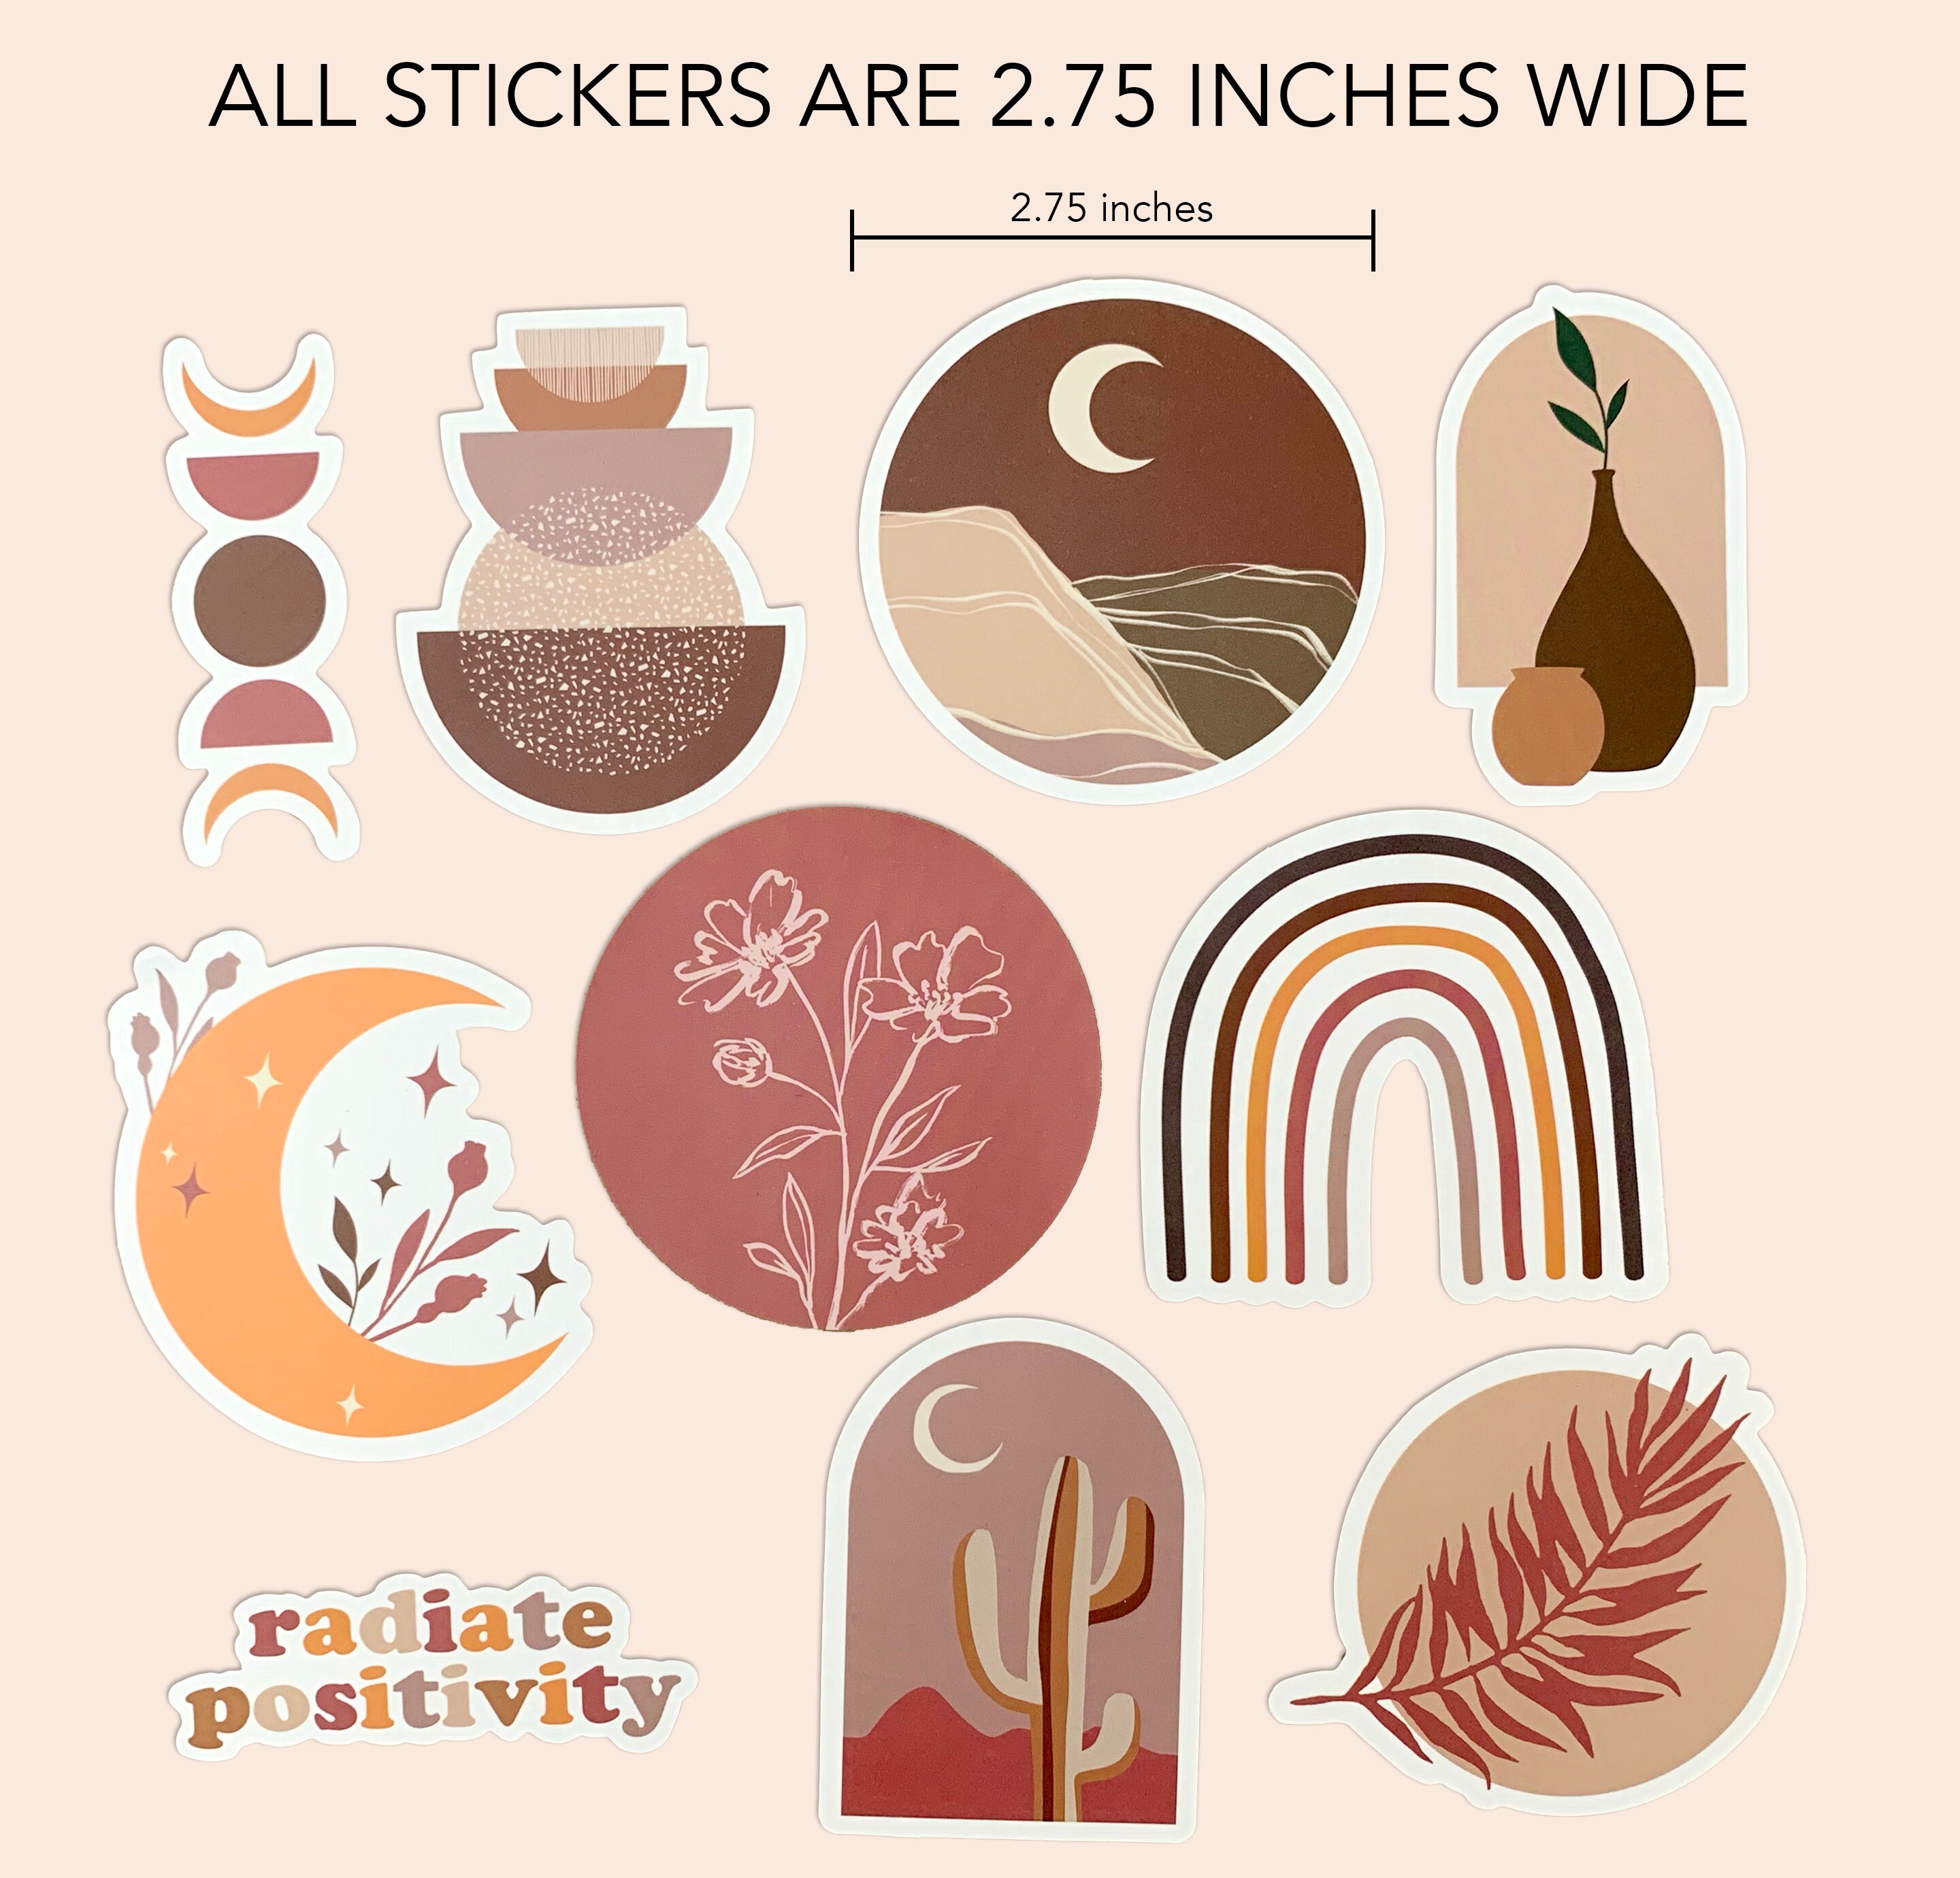 Bohemian Aesthetic Sticker Pack Cute Hydro Flask Stickers Self-love and  Positivity Stickers for Water Bottle Laptop/phone Case Sticker 